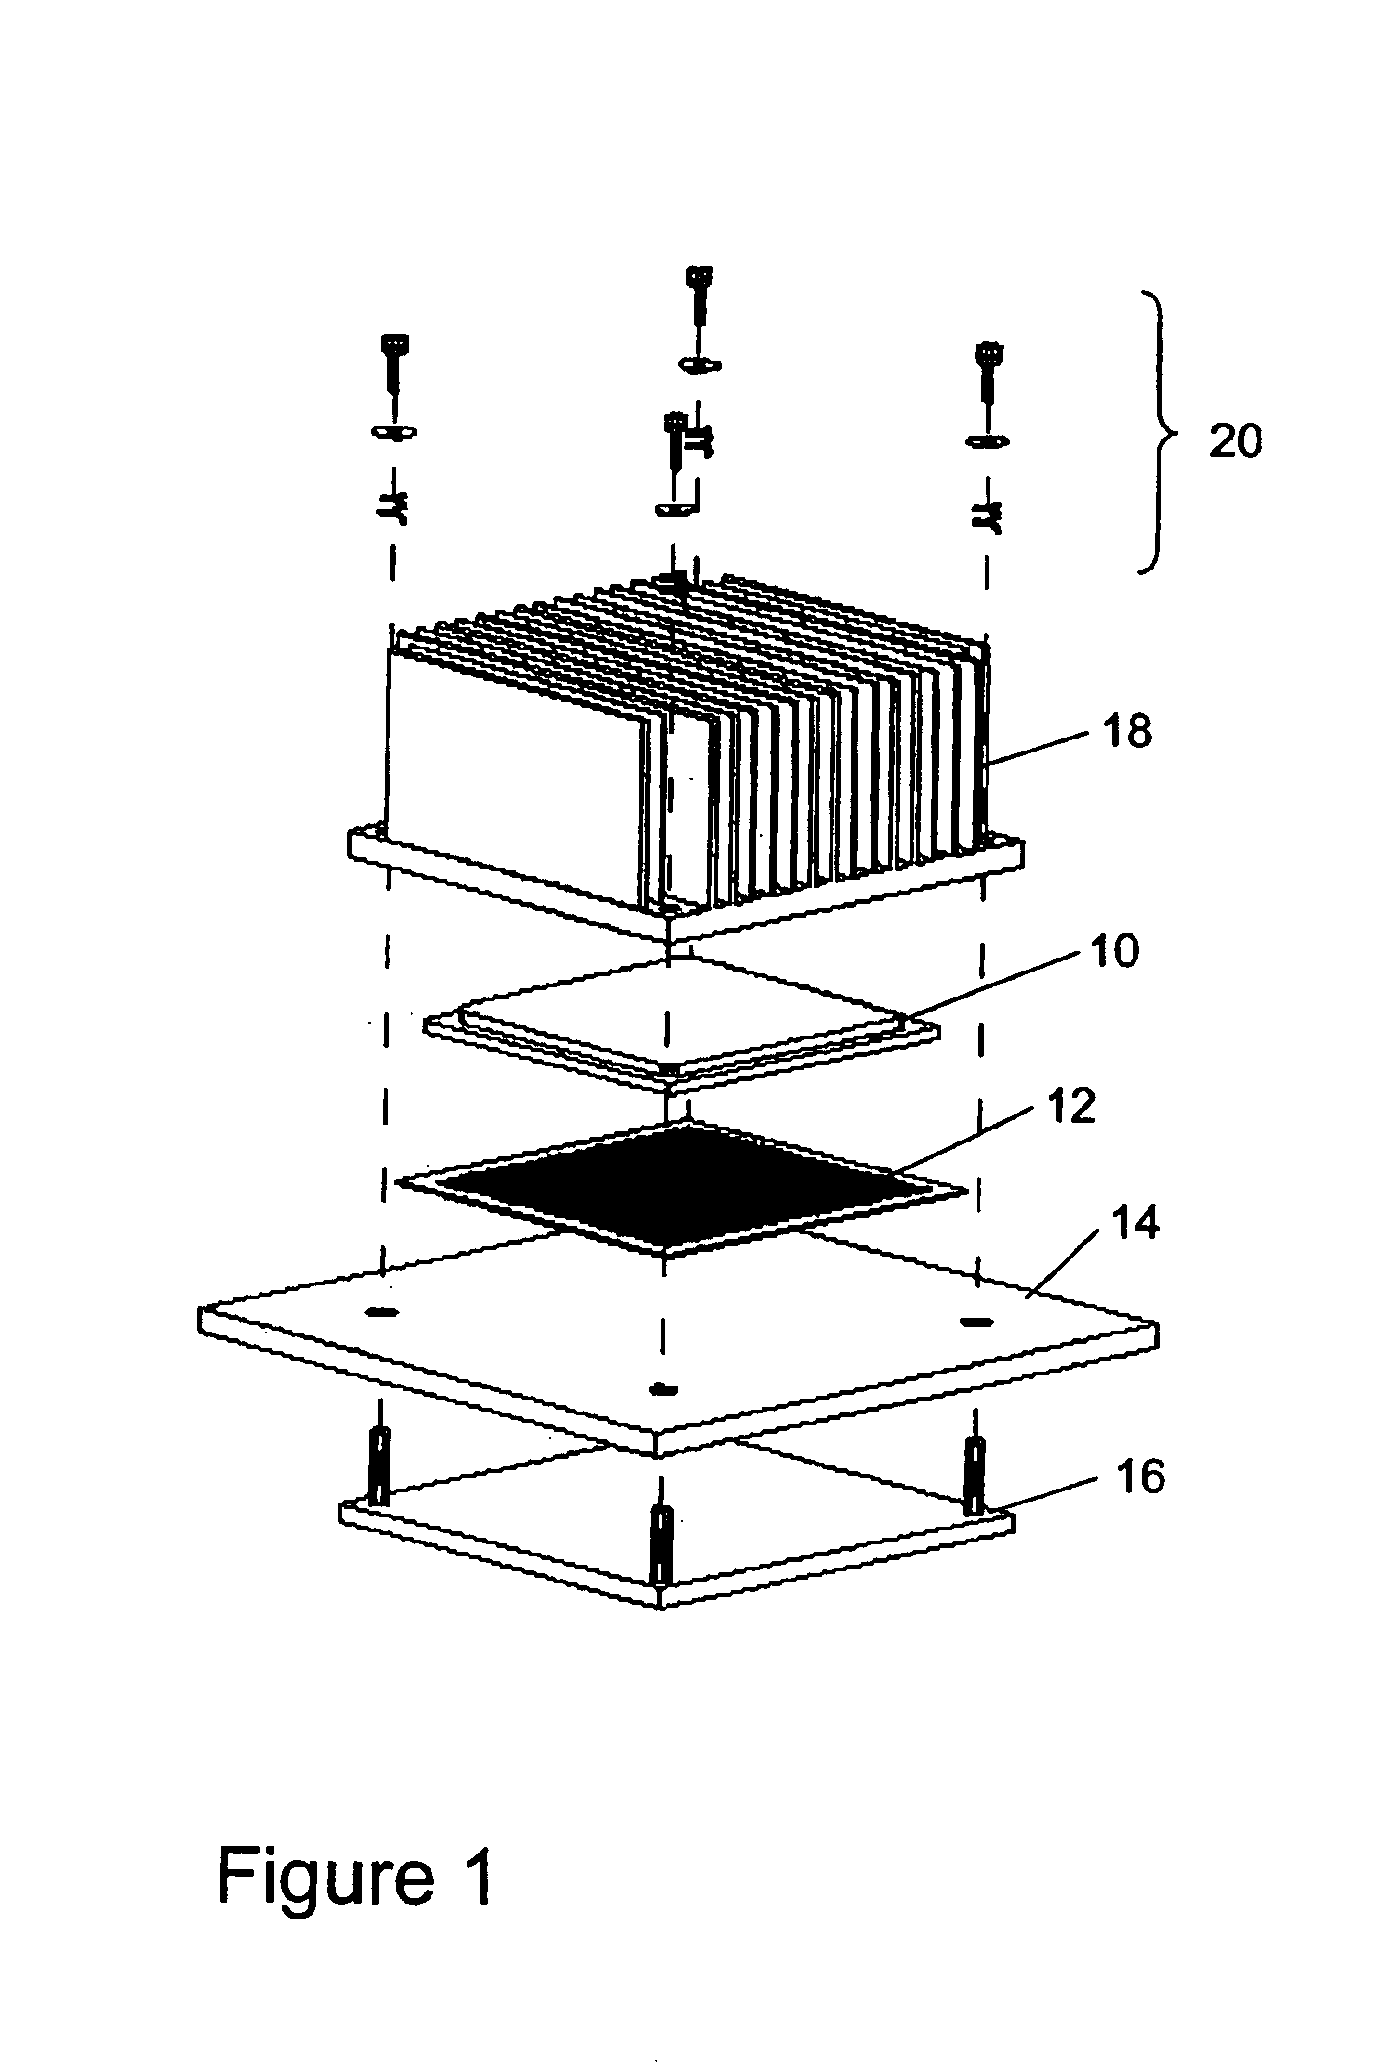 Circuitized connector for land grid array